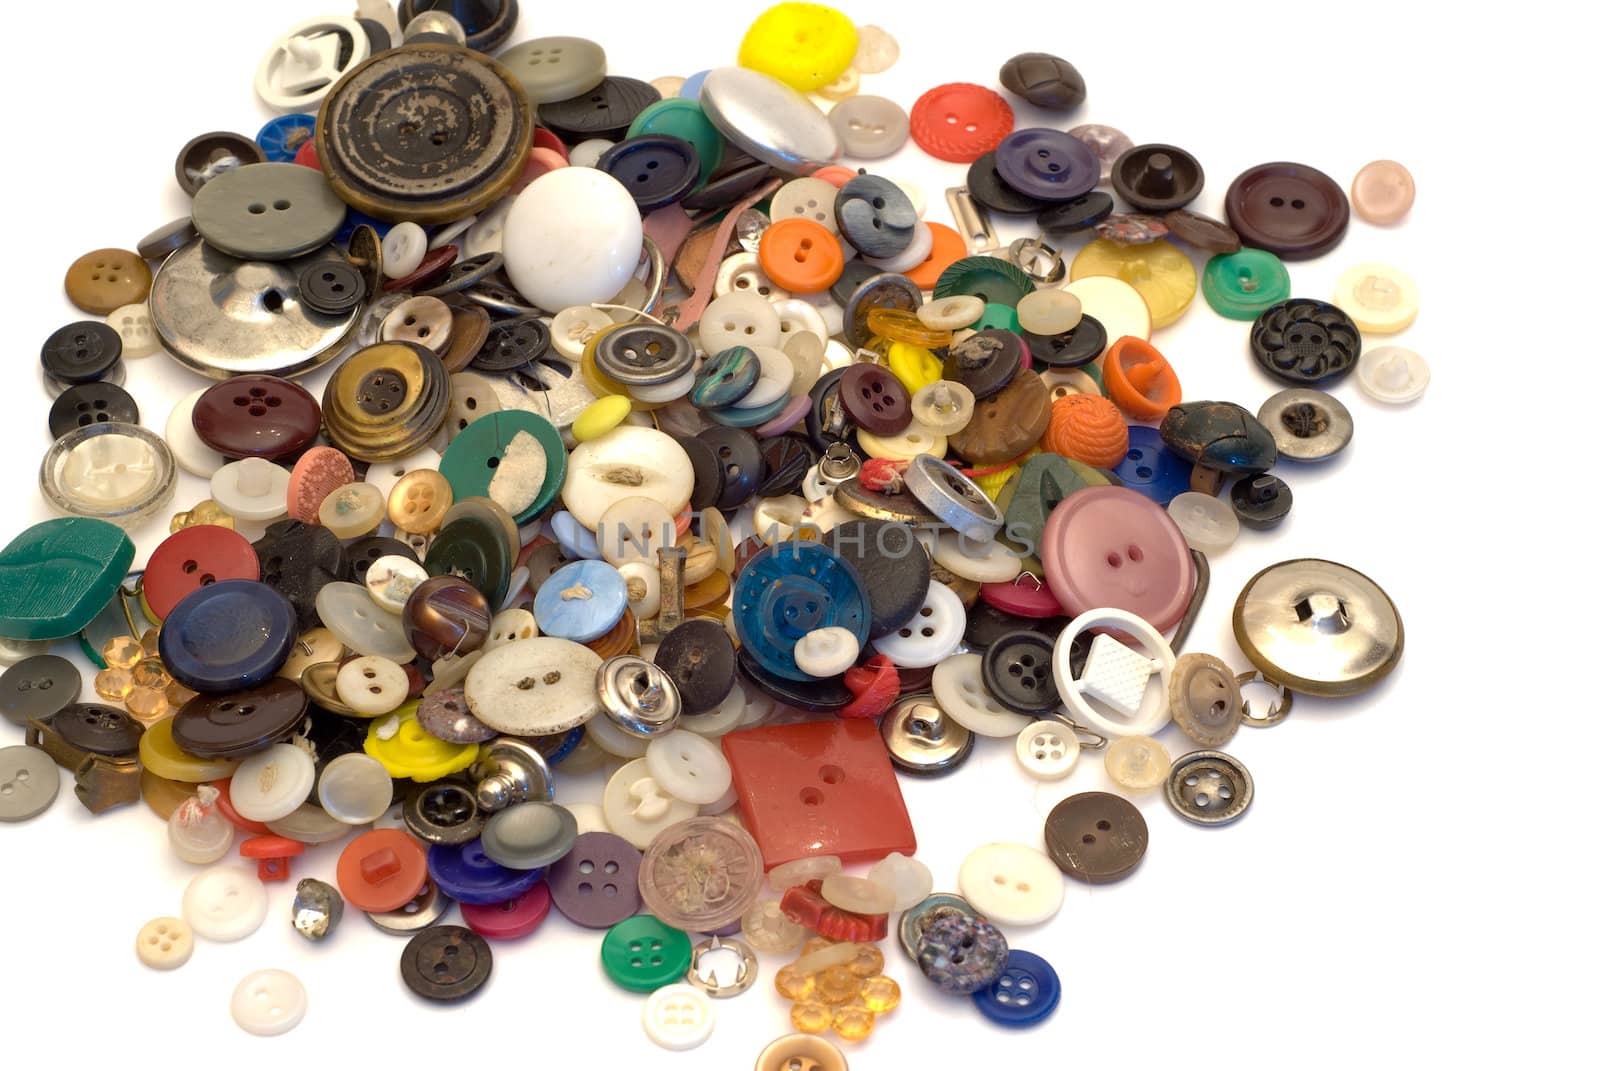 A large pile of sewing buttons, isolated on a white background